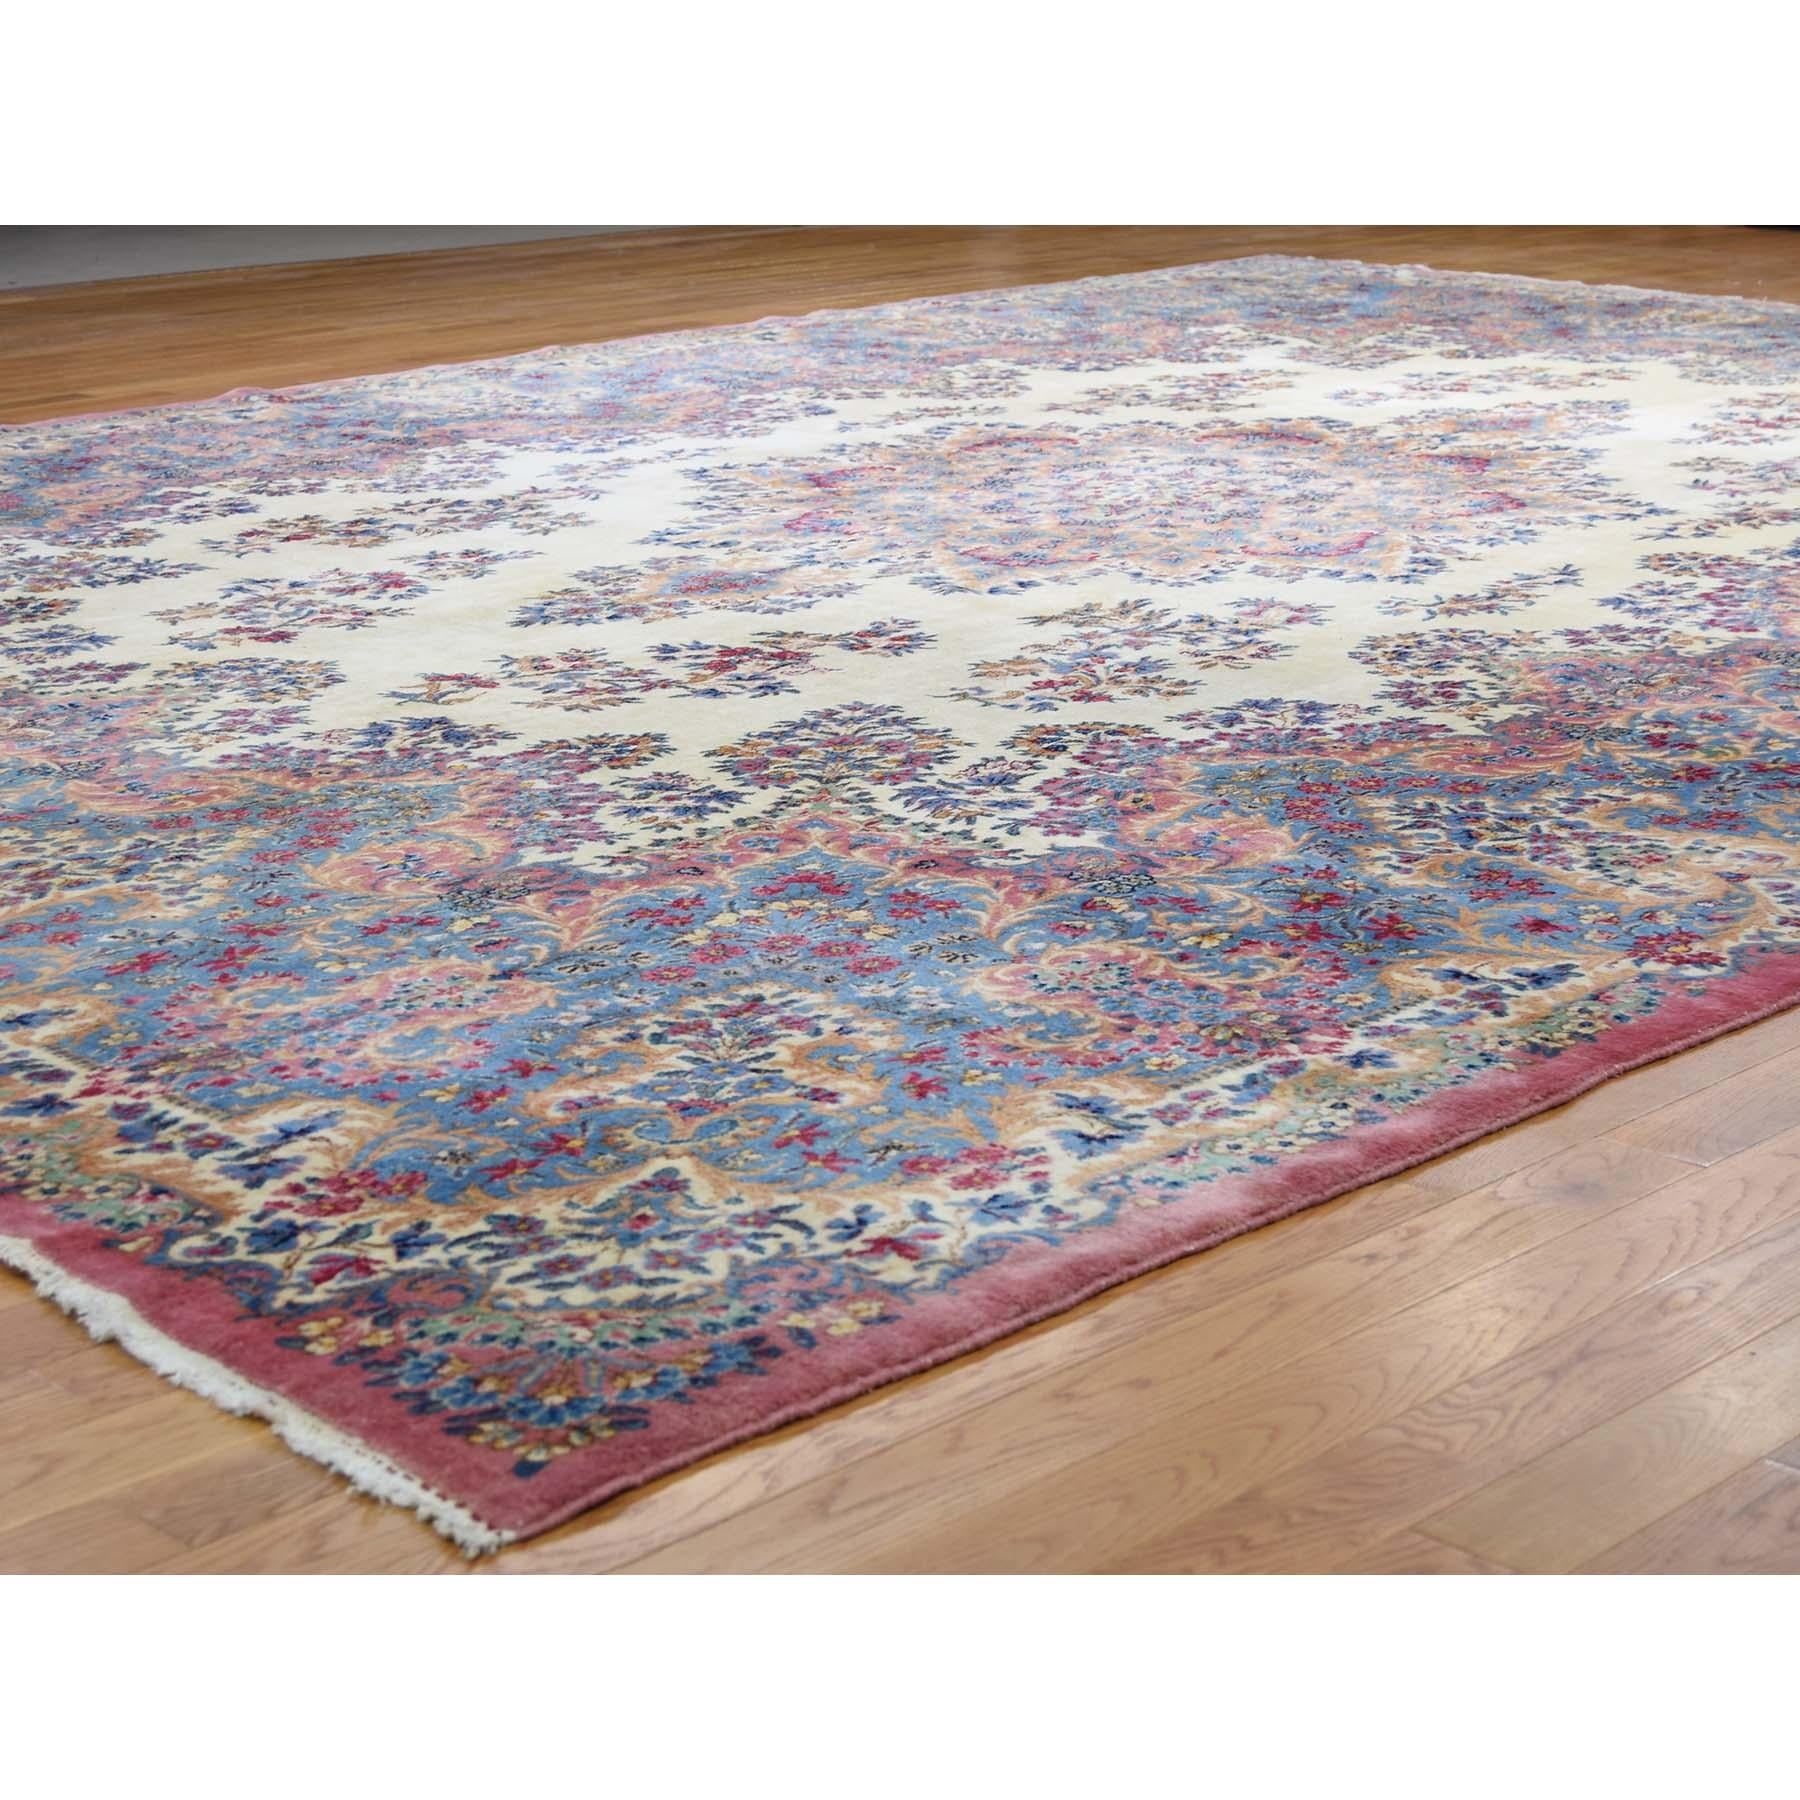 Hand-Knotted Semi Antique Persian Kerman Full Pile Soft Oversize Rug